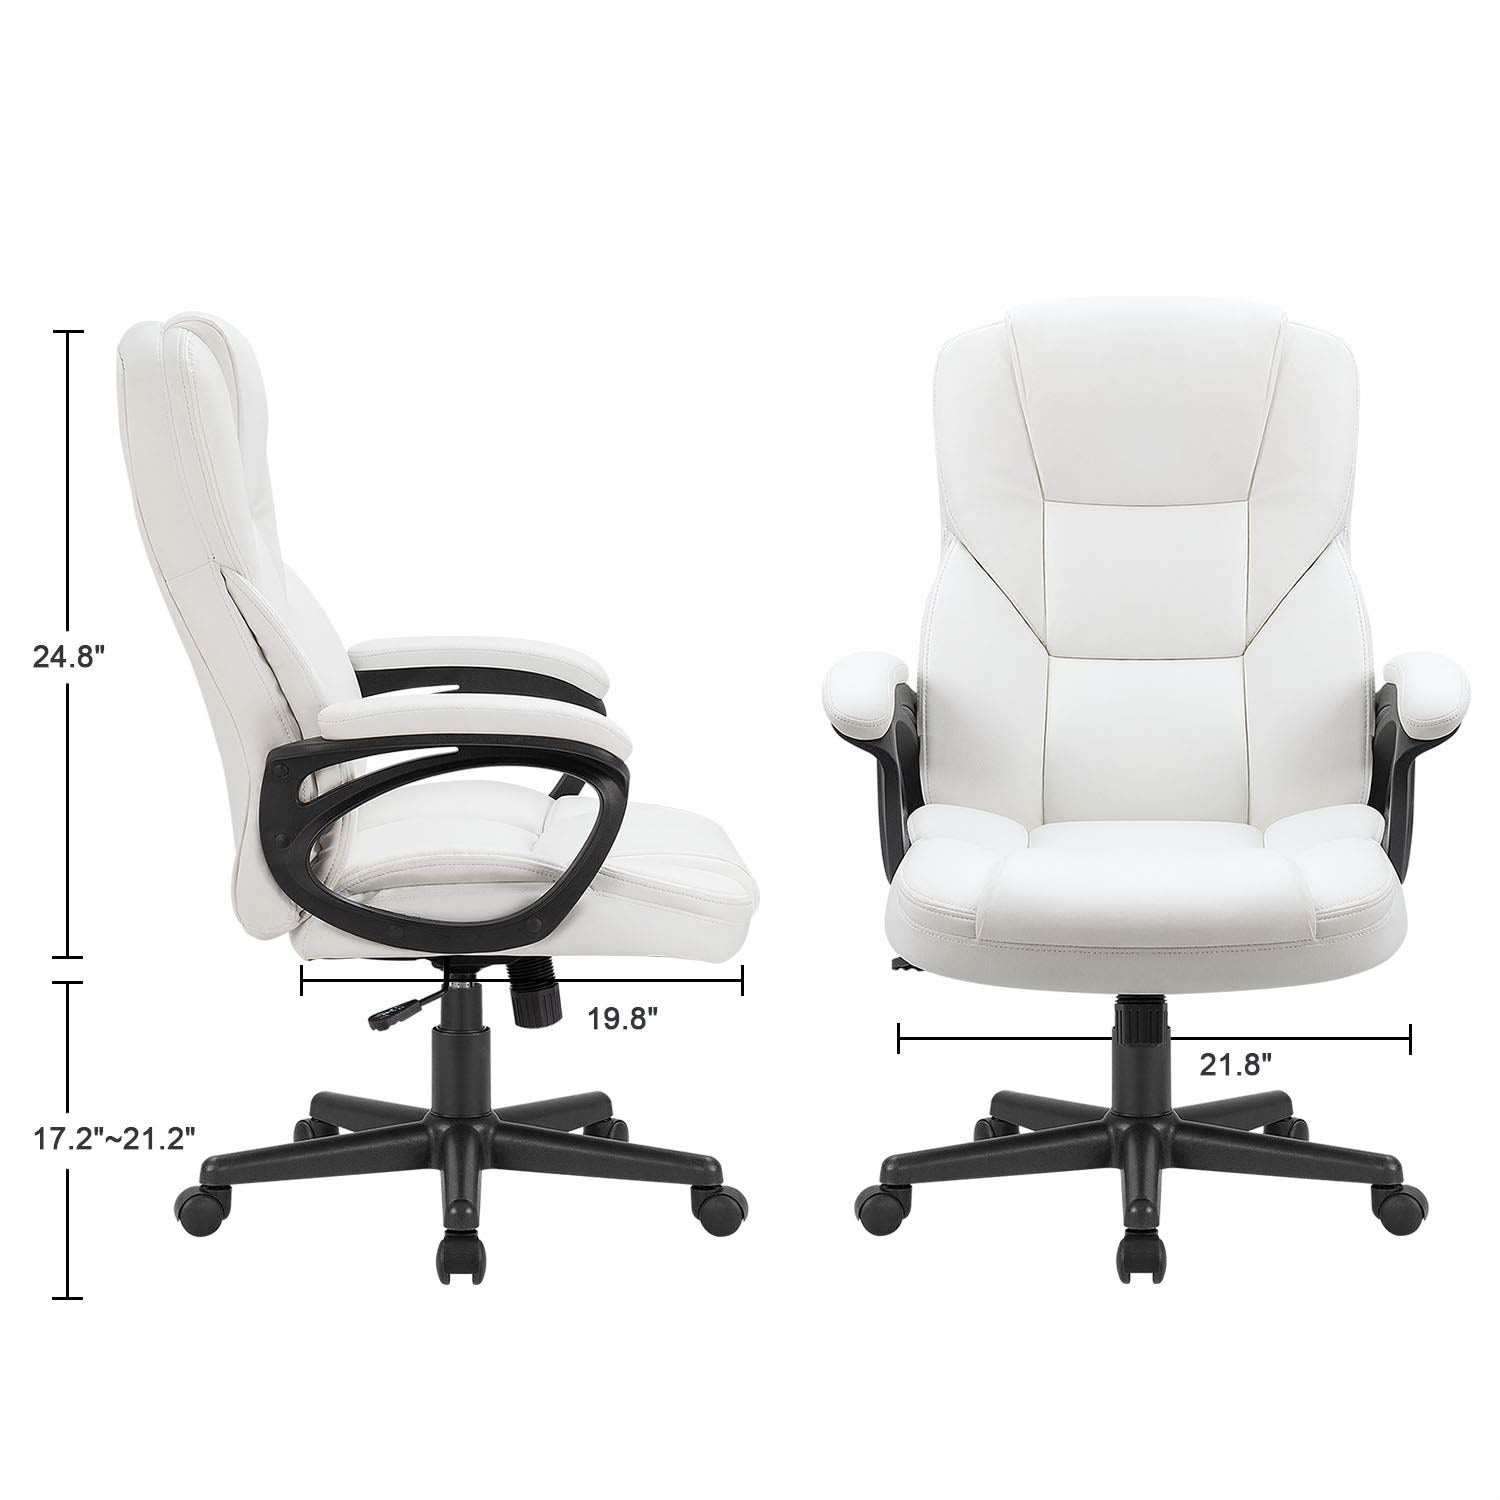 https://ak1.ostkcdn.com/images/products/is/images/direct/5e222e44aa4aa0fc0ed0311ae905398ba5af9b1f/Homall-Office-Desk-Chair-High-Back-Exectuive-Ergonomic-Computer-Chair.jpg